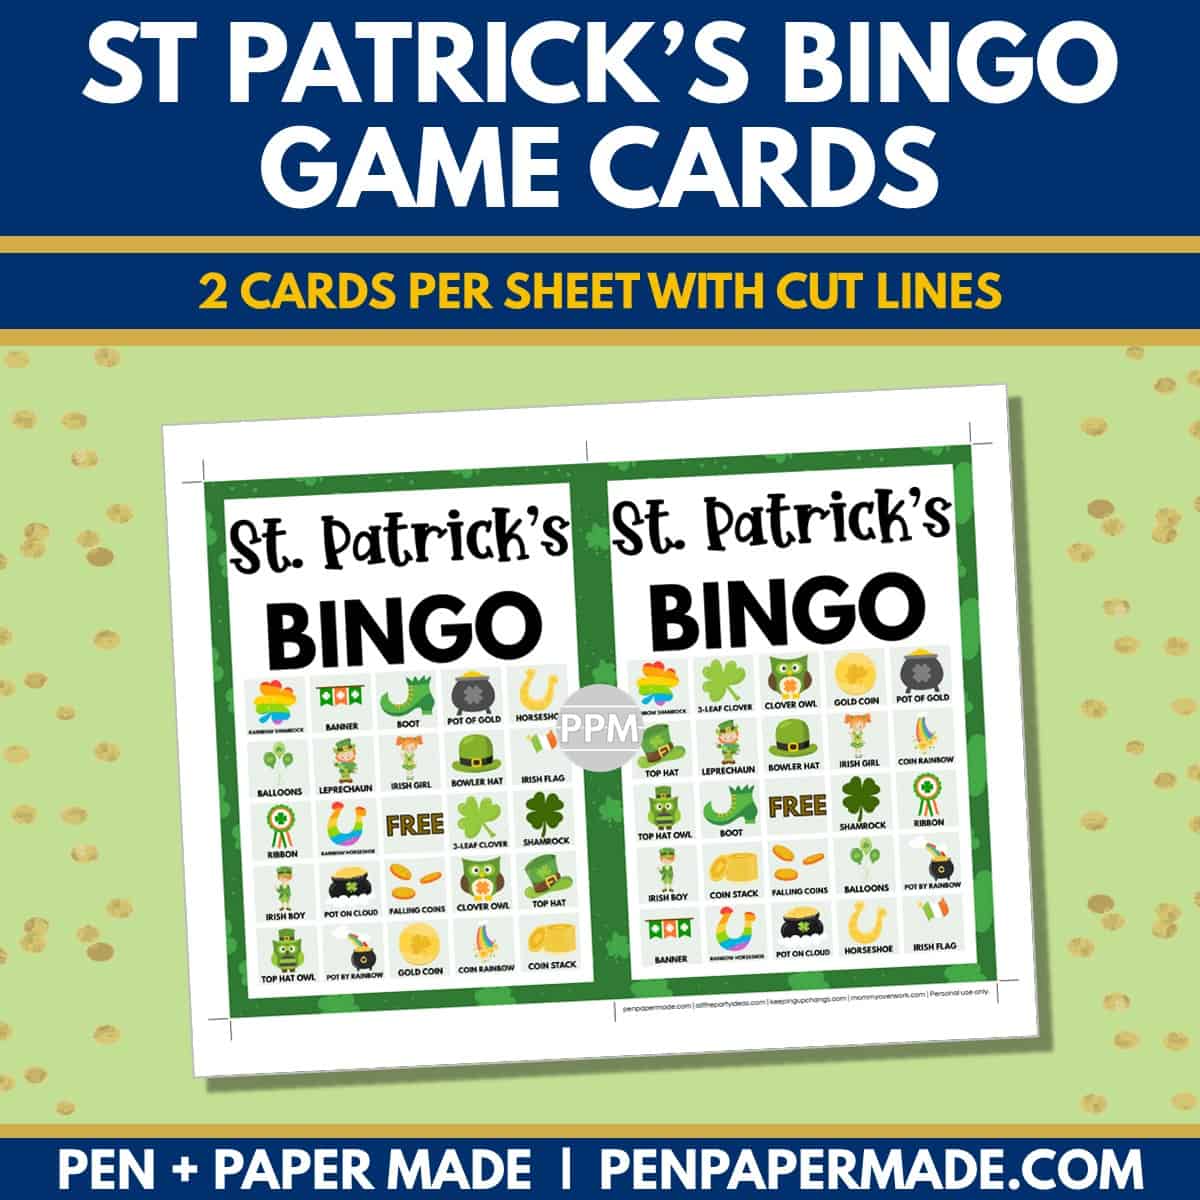 st. patrick's day bingo card 5x5 5x7 game boards with images and text words.